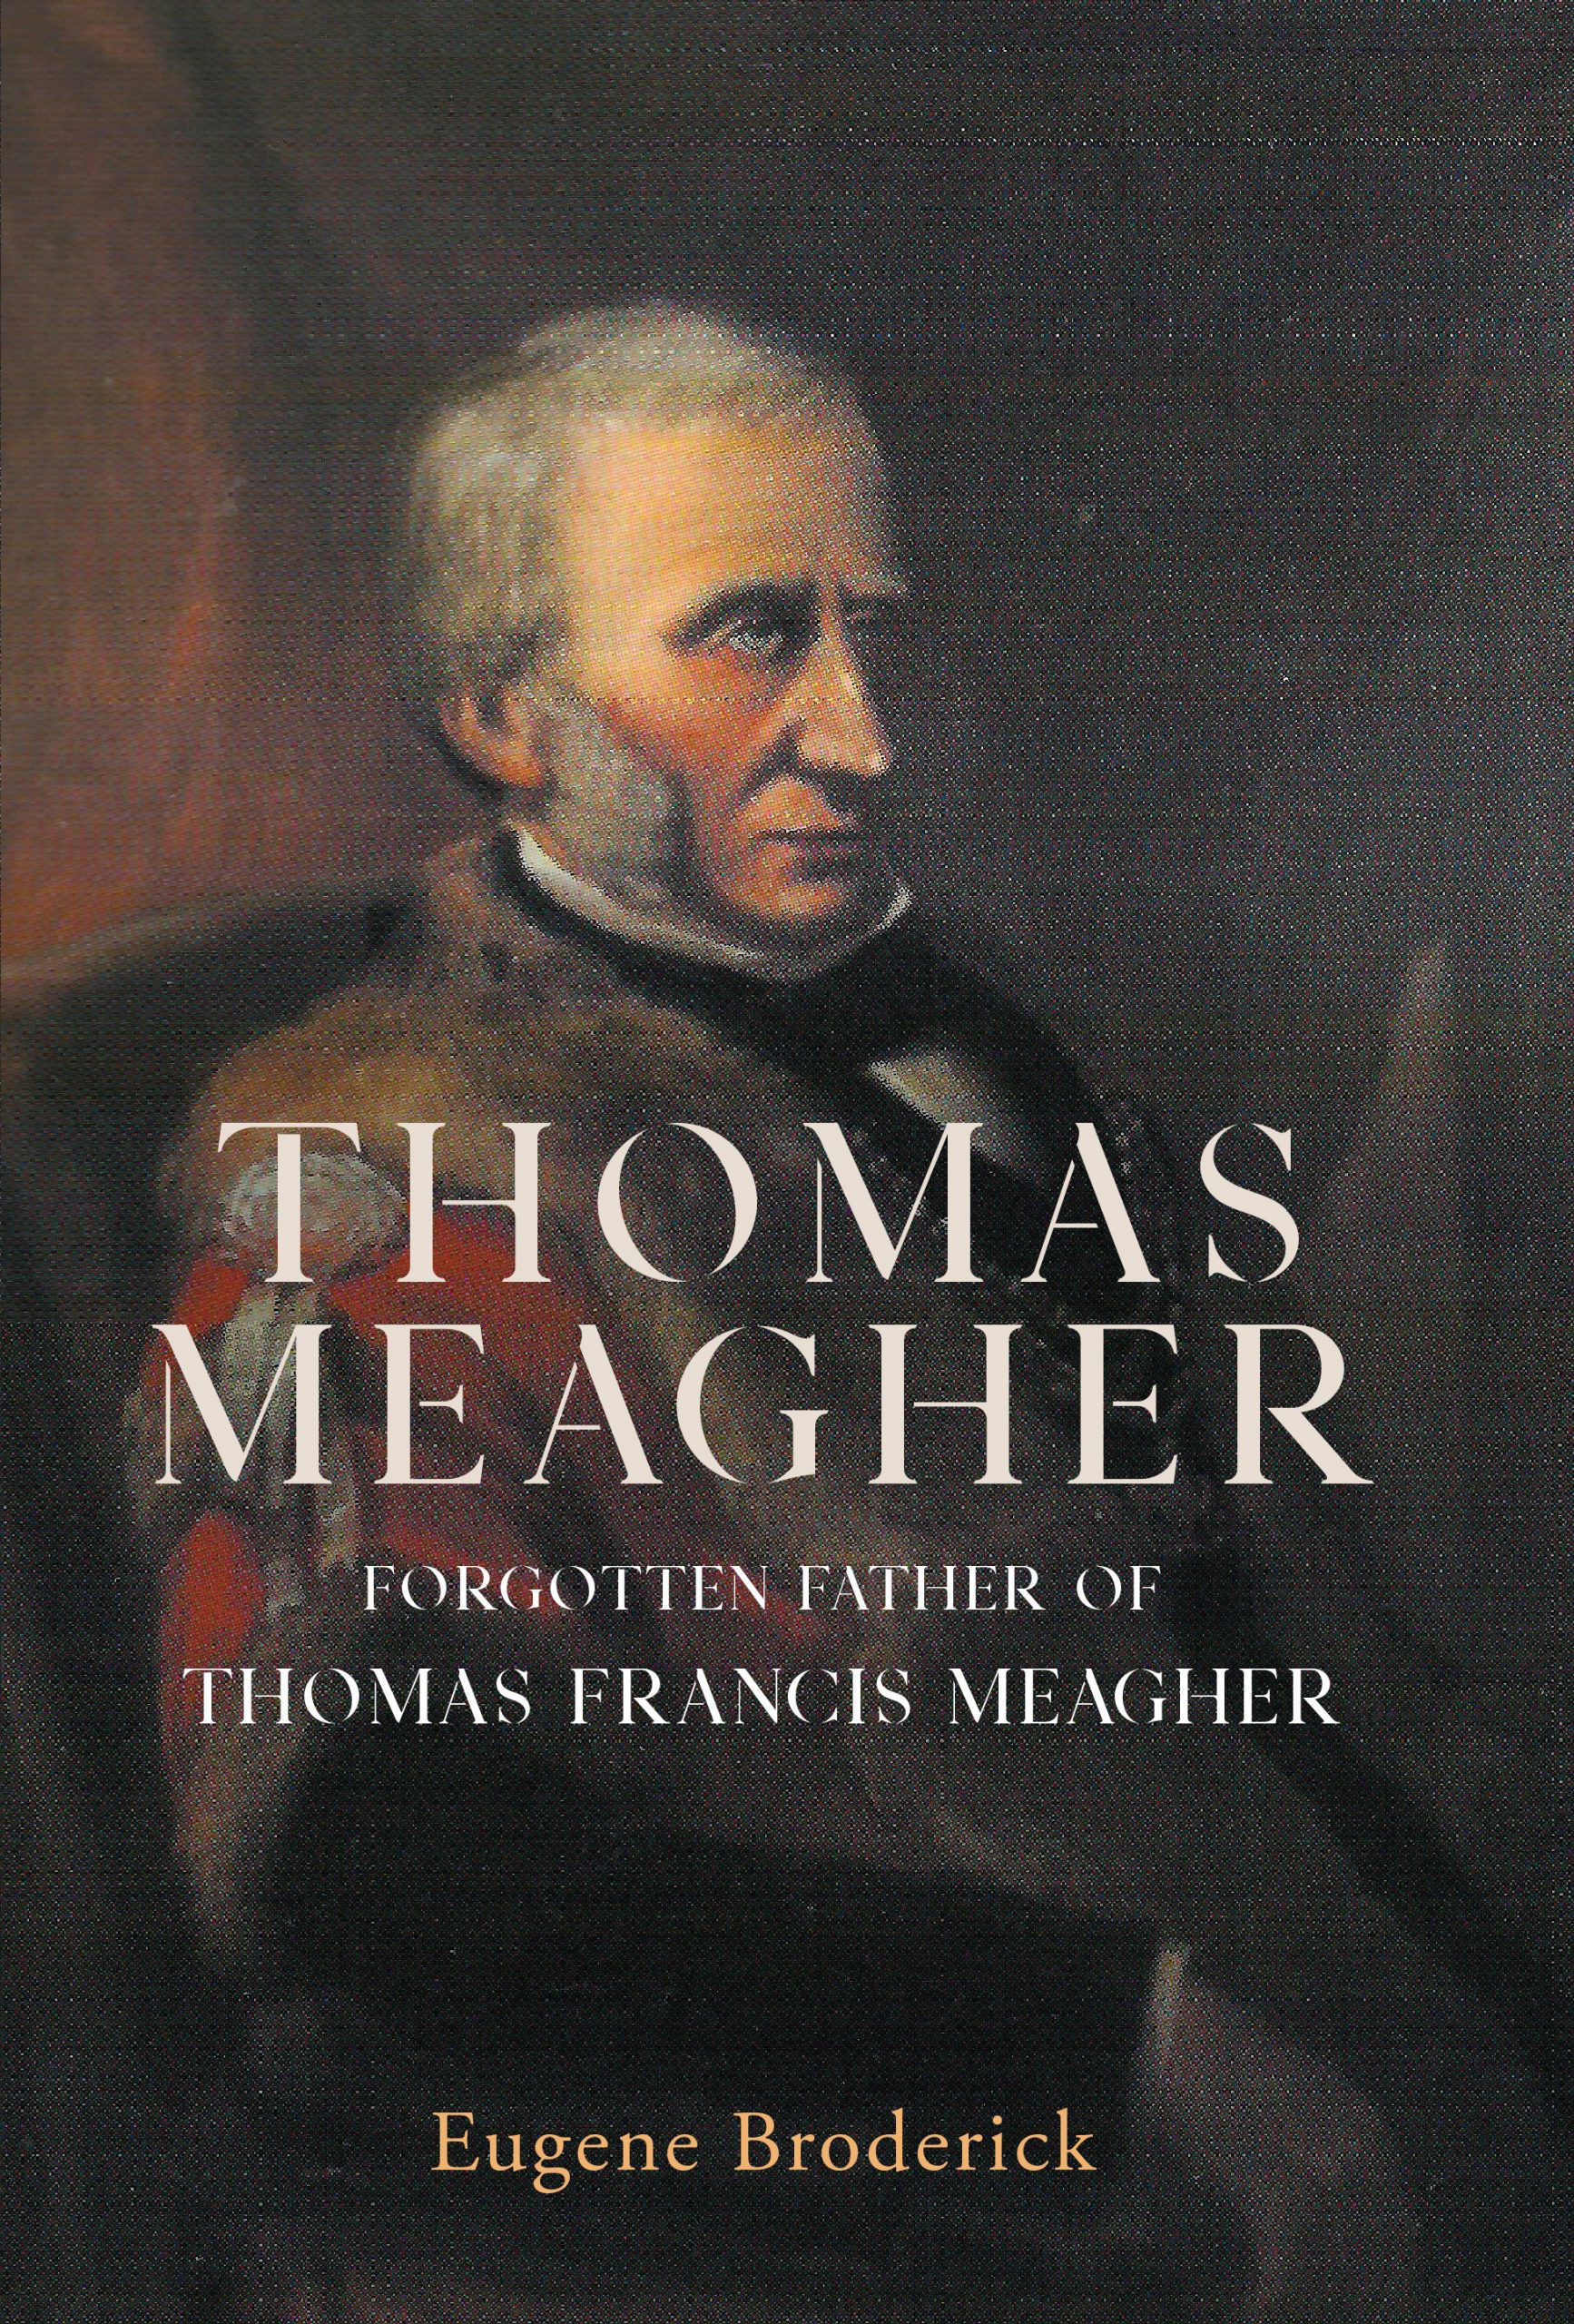 Thomas Meagher: Forgotten Father of Thomas Francis Meagher by Eugene Broderick